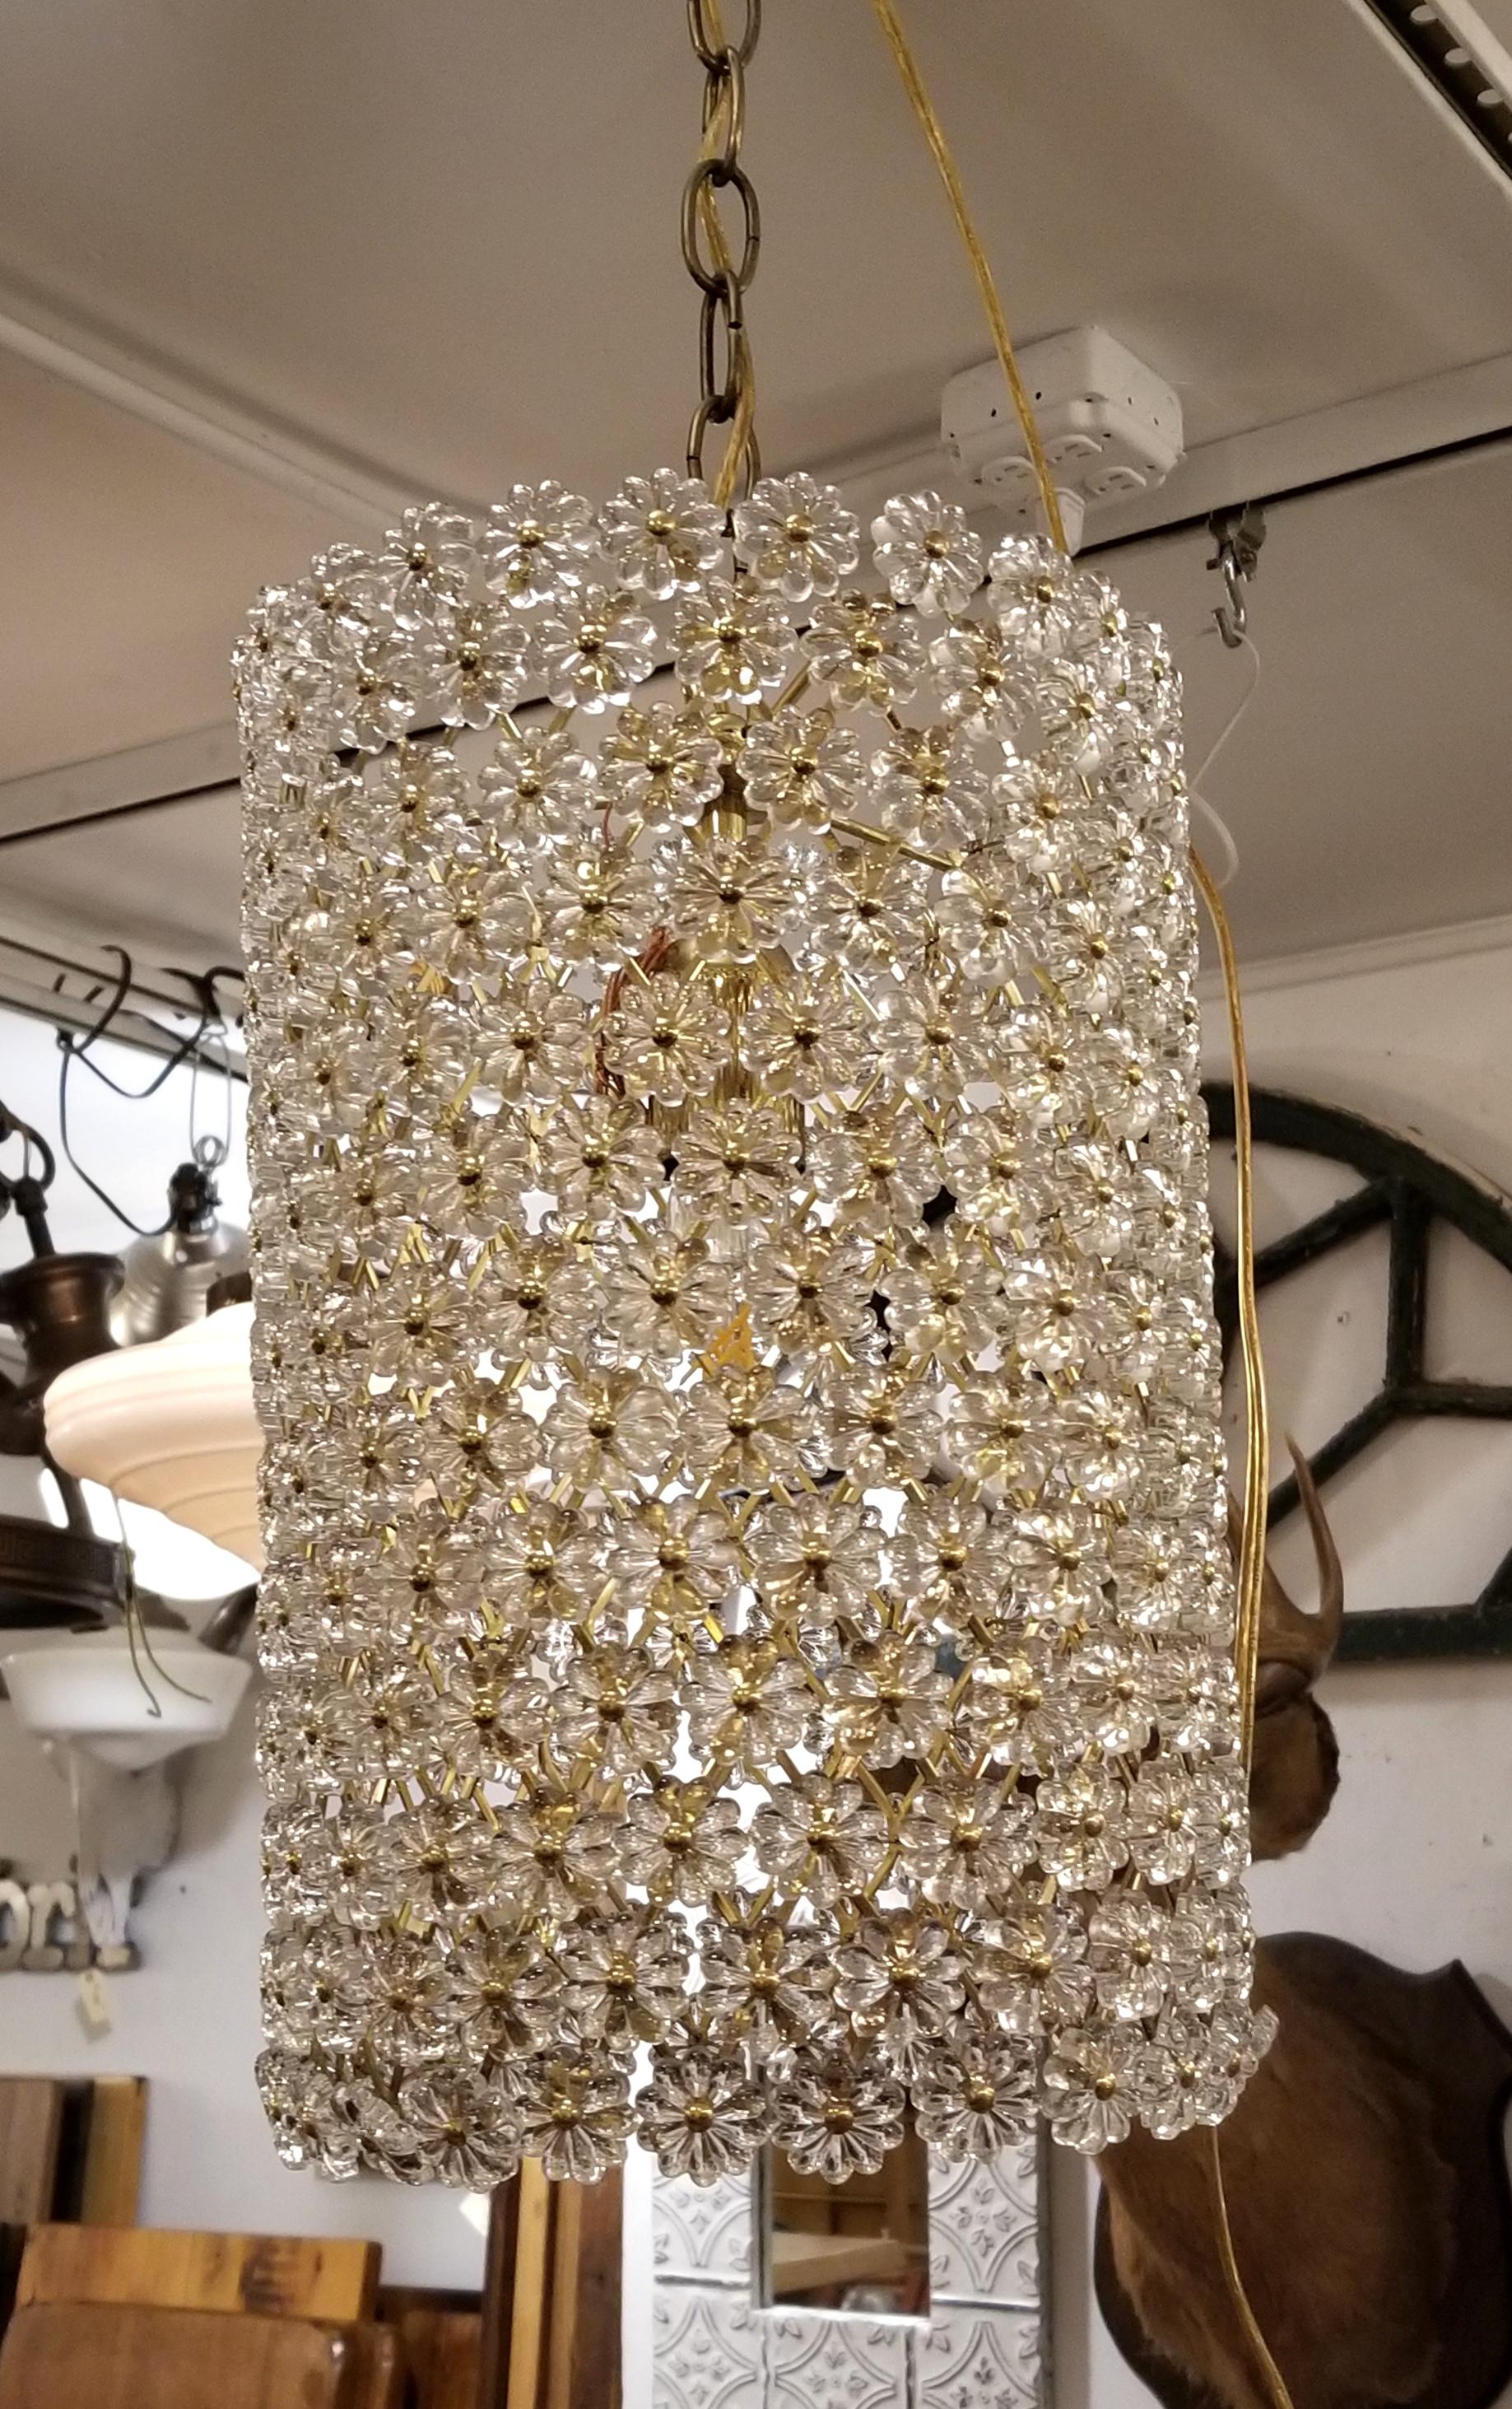 Modern replica Maison Baguès style floral pendant light with chain. Cylindrical brass frame with clear florets. The shade itself is 15 in. high without measuring any chain or canopy. This item can be seen at our 302 Bowery location in Manhattan.